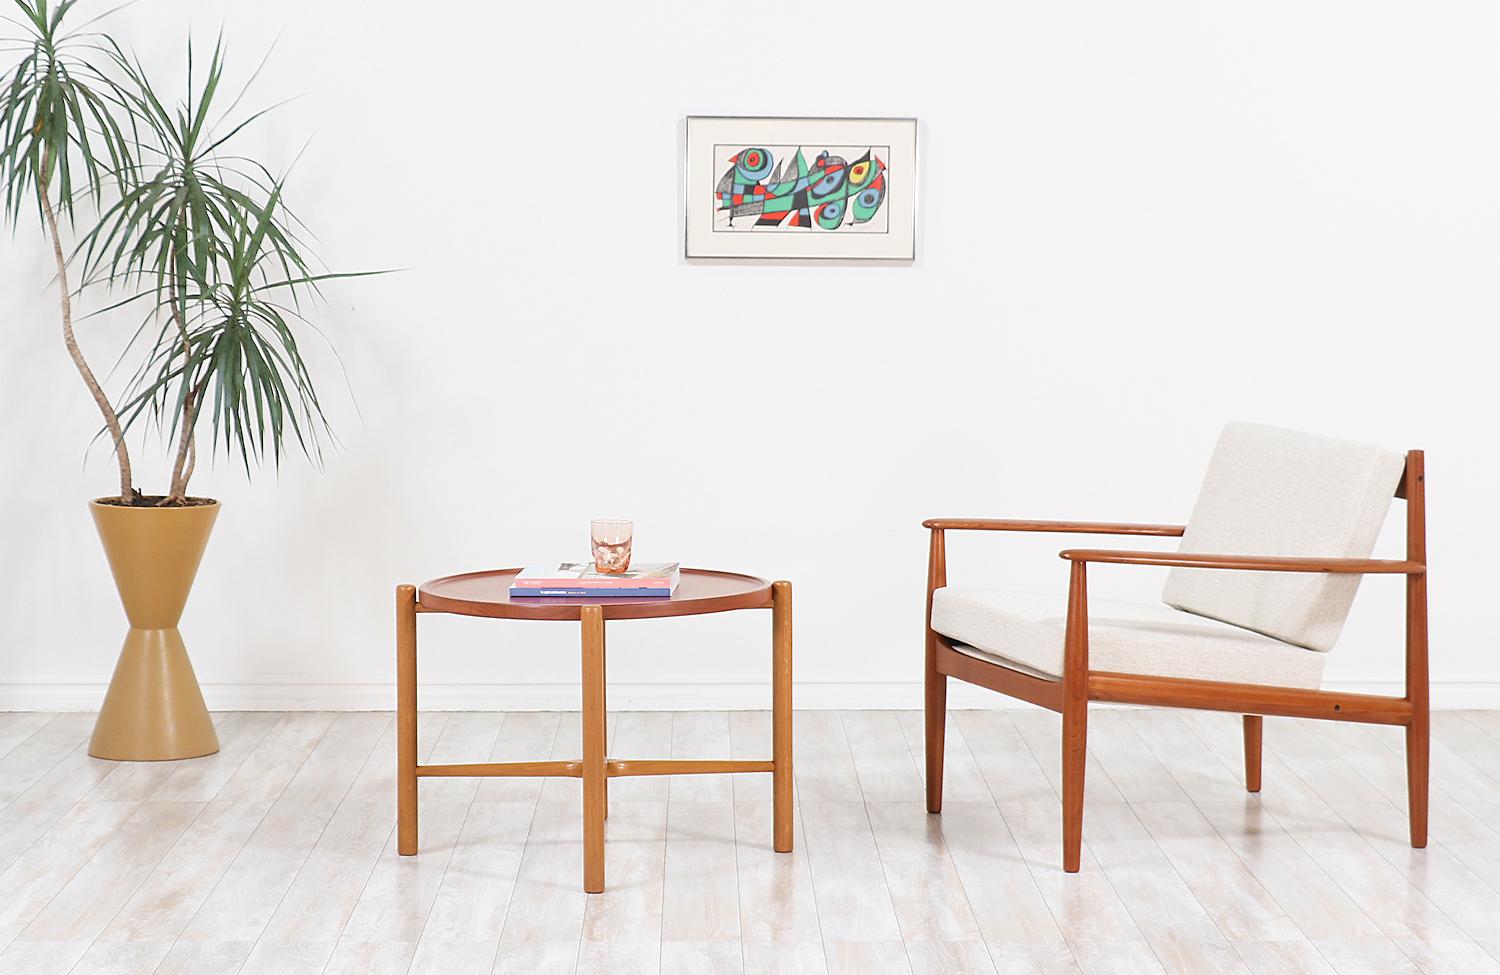 Elegant lounge chair designed by one of the few female midcentury furniture designers, Grete Jalk. This example was designed in collaboration with the Danish company France & Søn in Denmark in the 1960s. Handcrafted in solid teak wood, it features